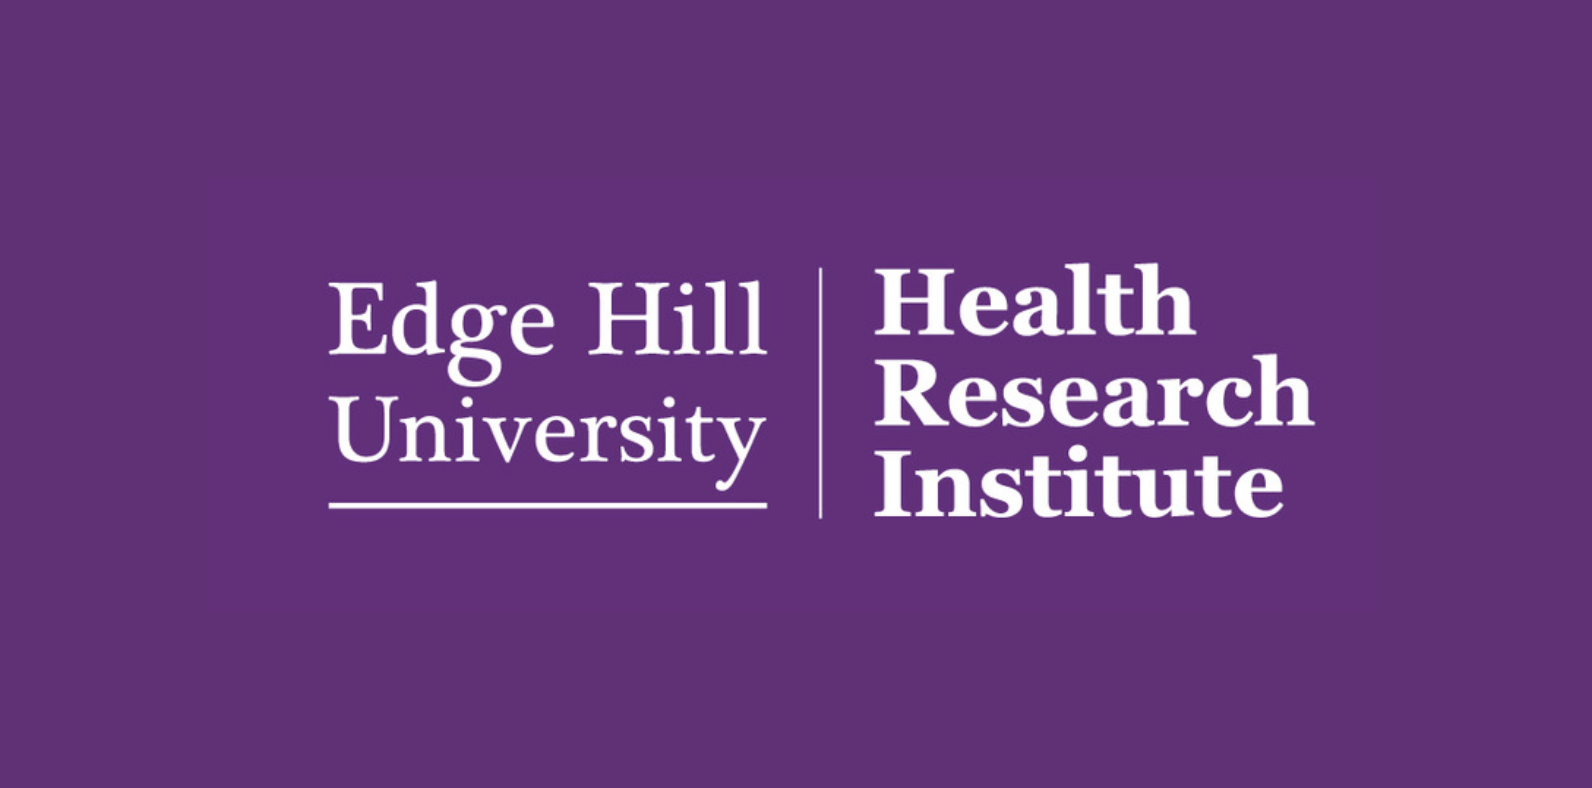 Introducing the Health Research Institute